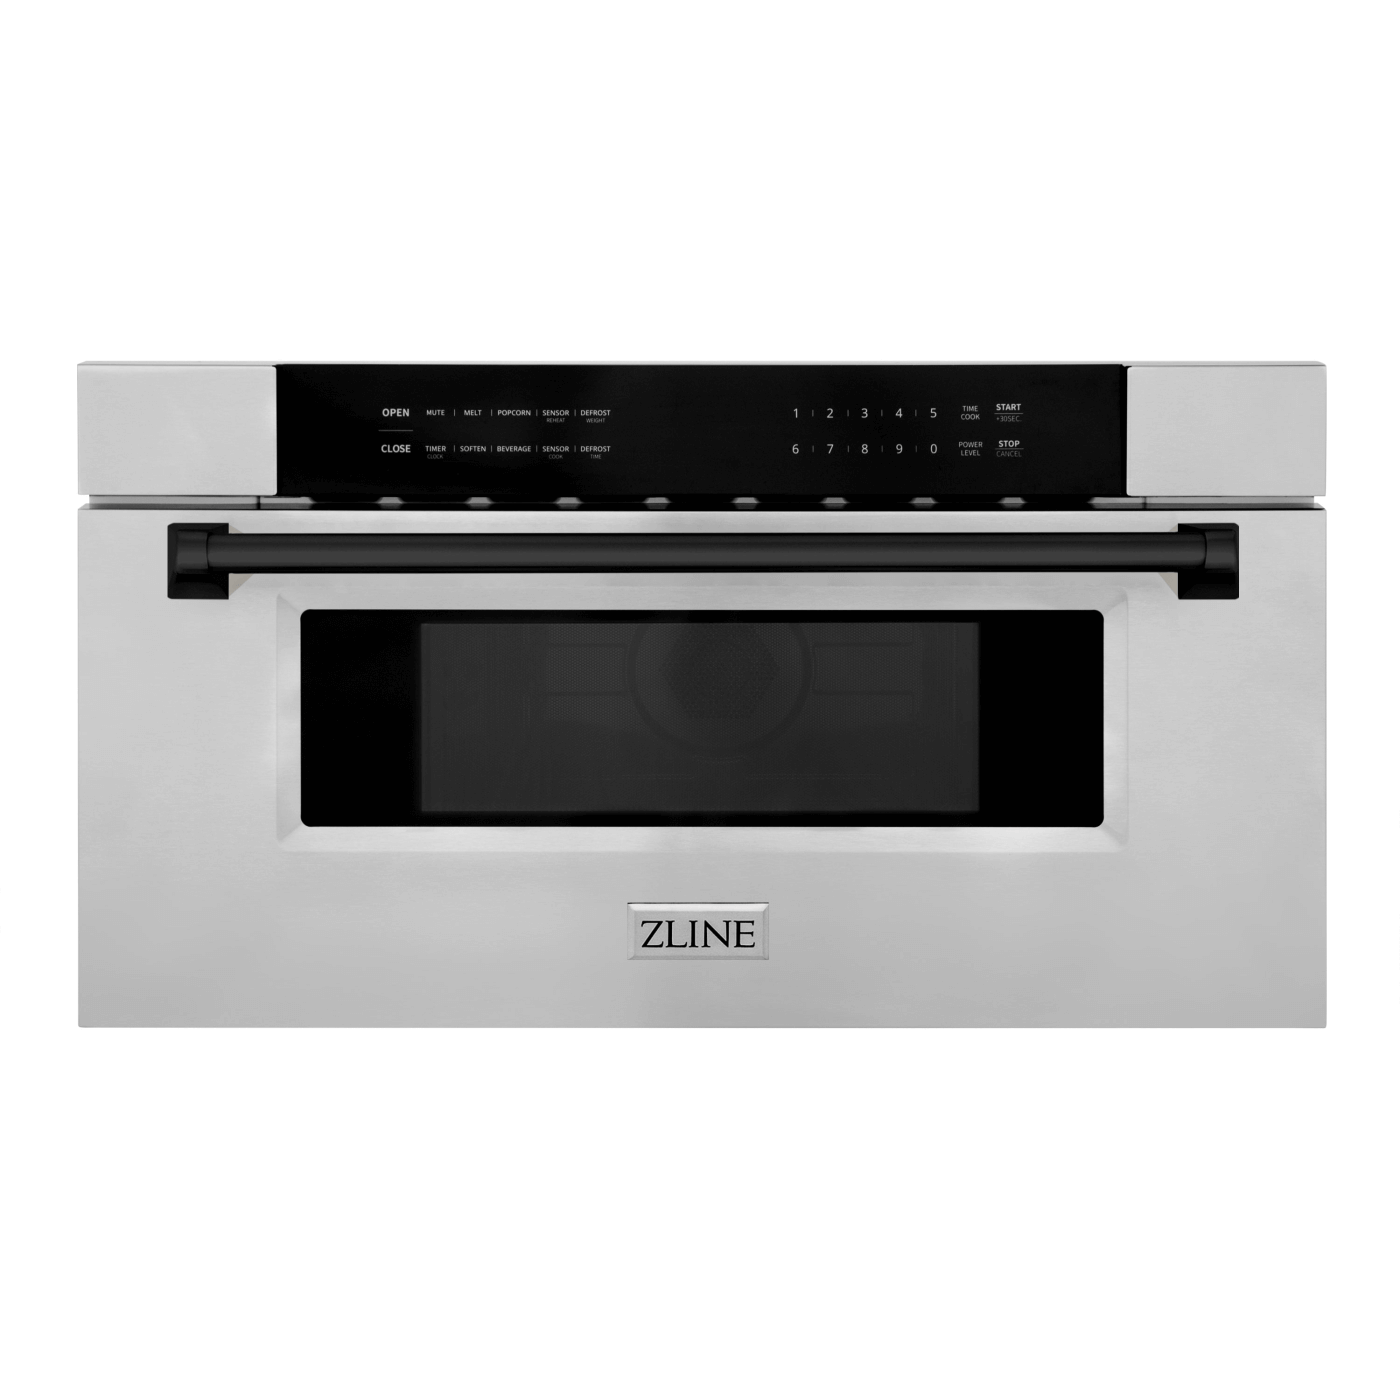 ZLINE Autograph Edition 30 in. 1.2 cu. ft. Built-In Microwave Drawer in Stainless Steel with Matte Black Accents (MWDZ-30-MB)